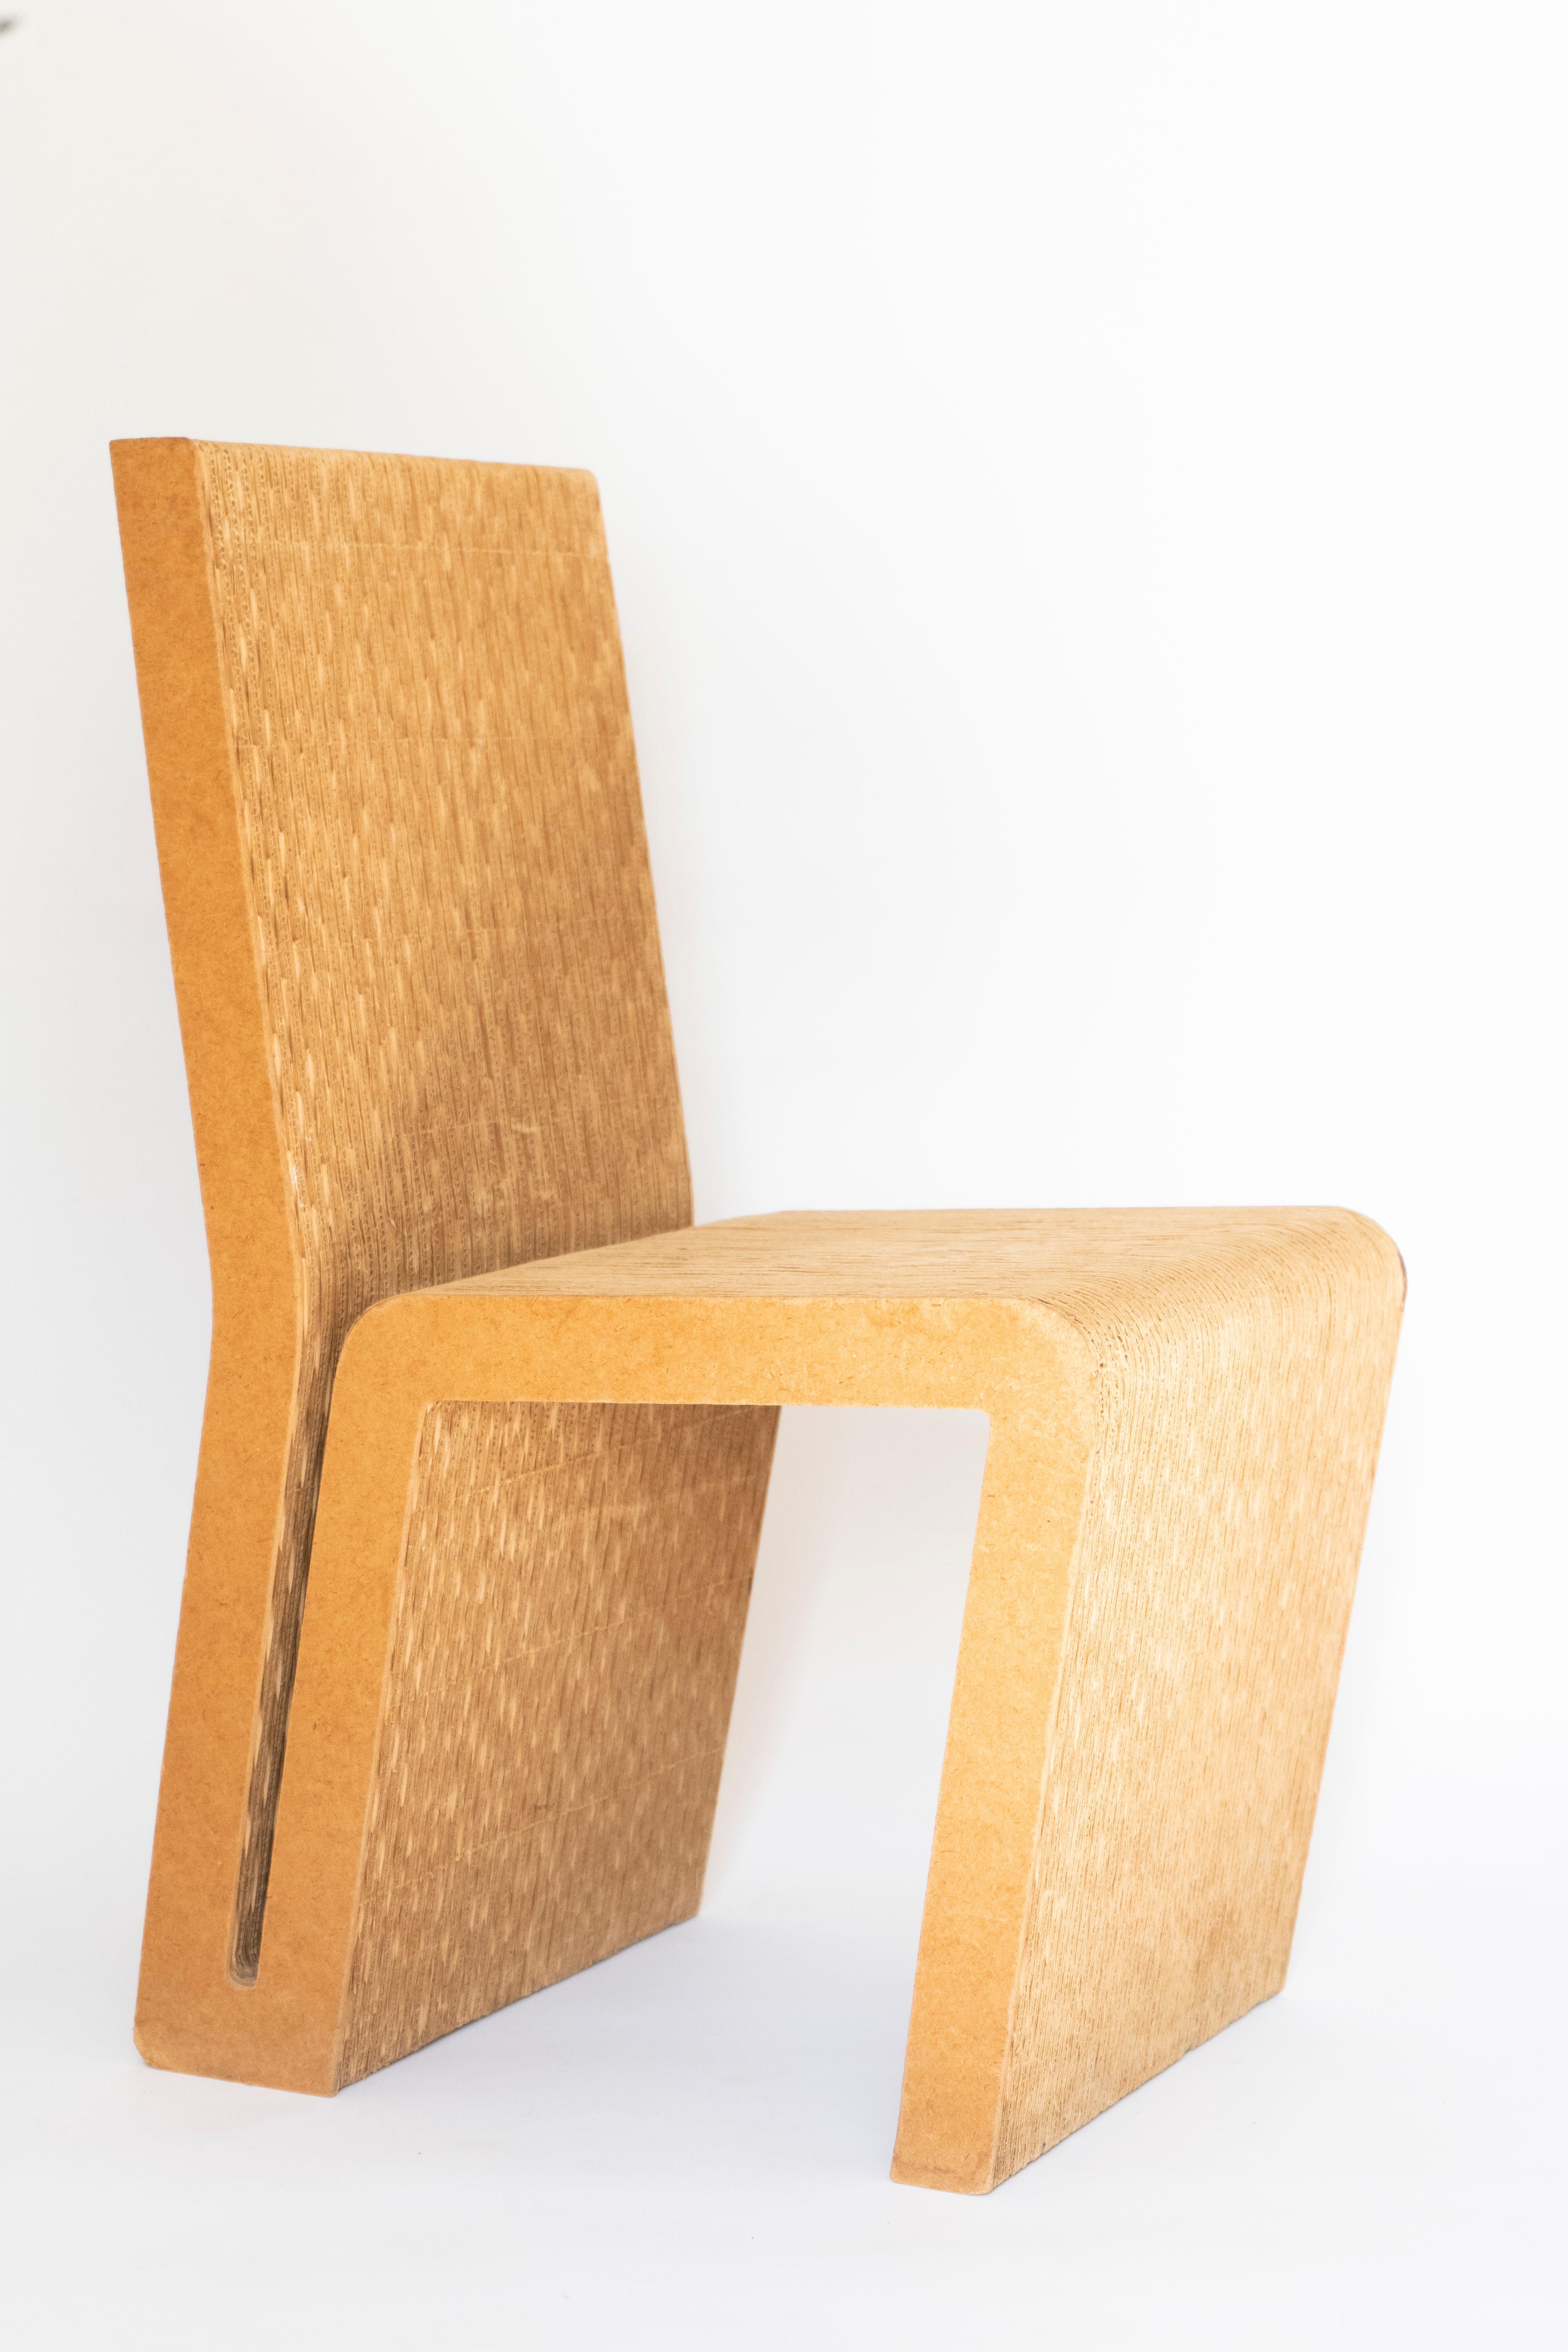 Other Easy Edges Cardboard Chair by Frank Gehry, Early 1970s Model For Sale